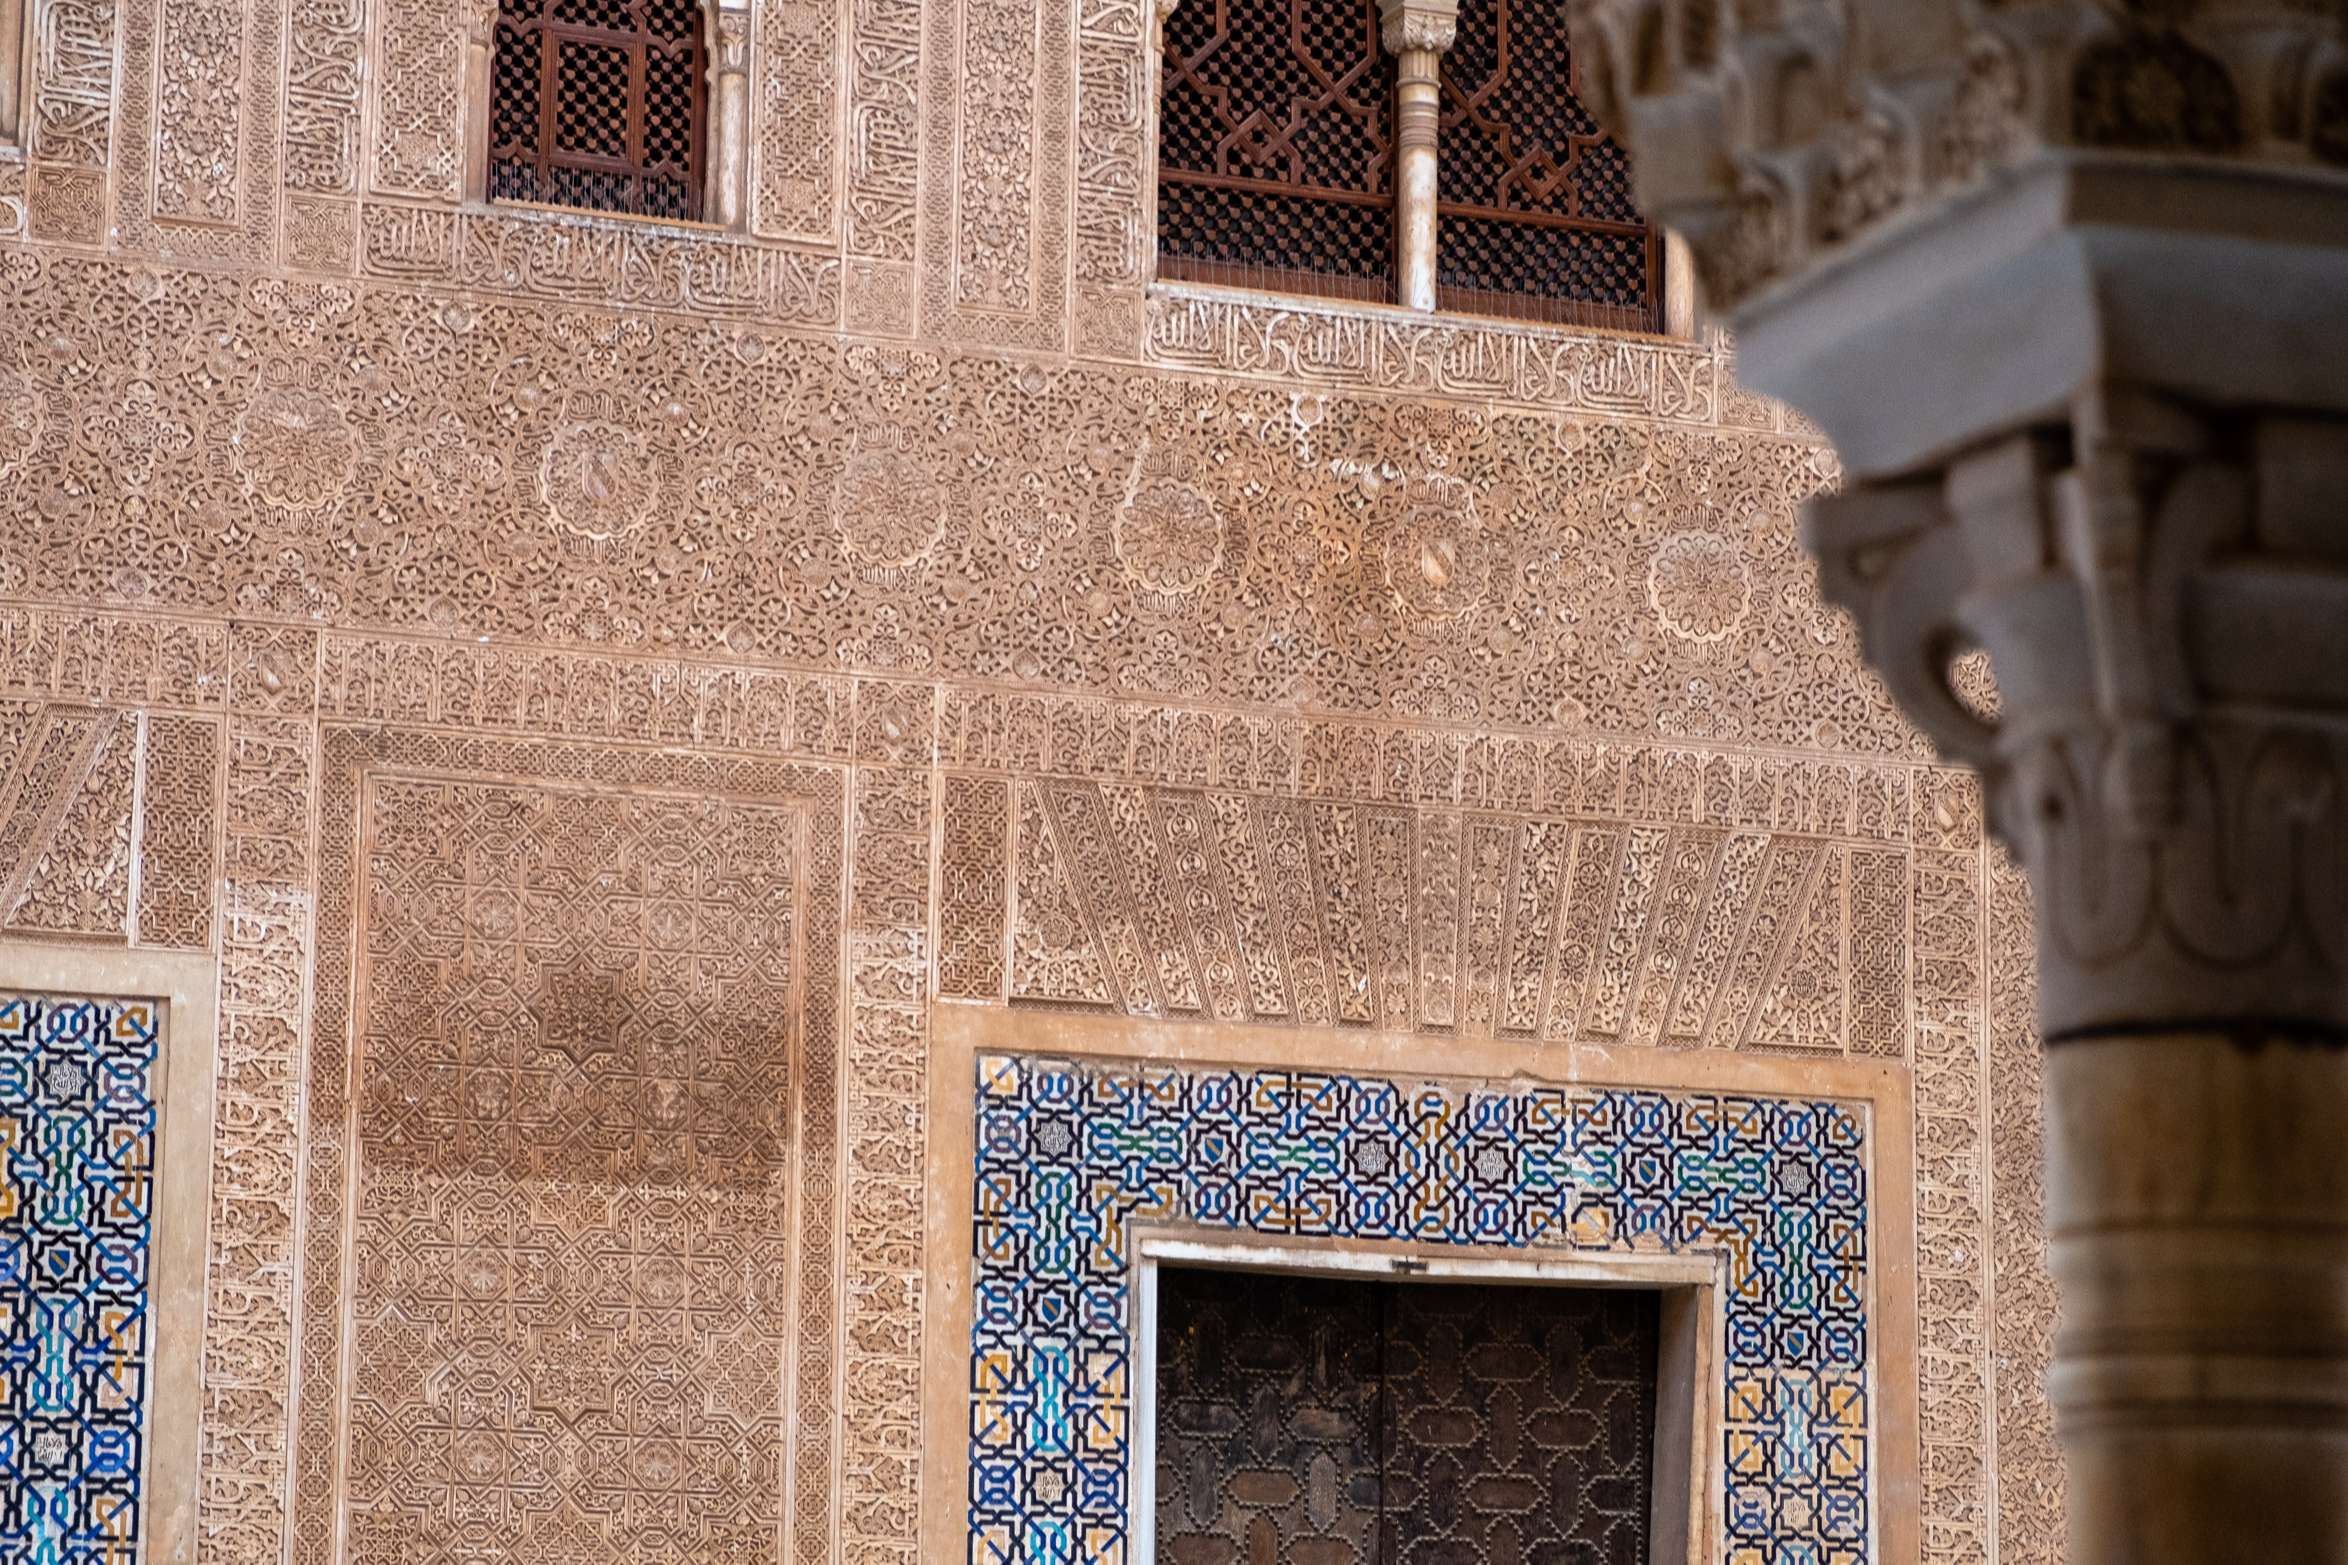 Intricately carved wall, The Alhambra, Granada